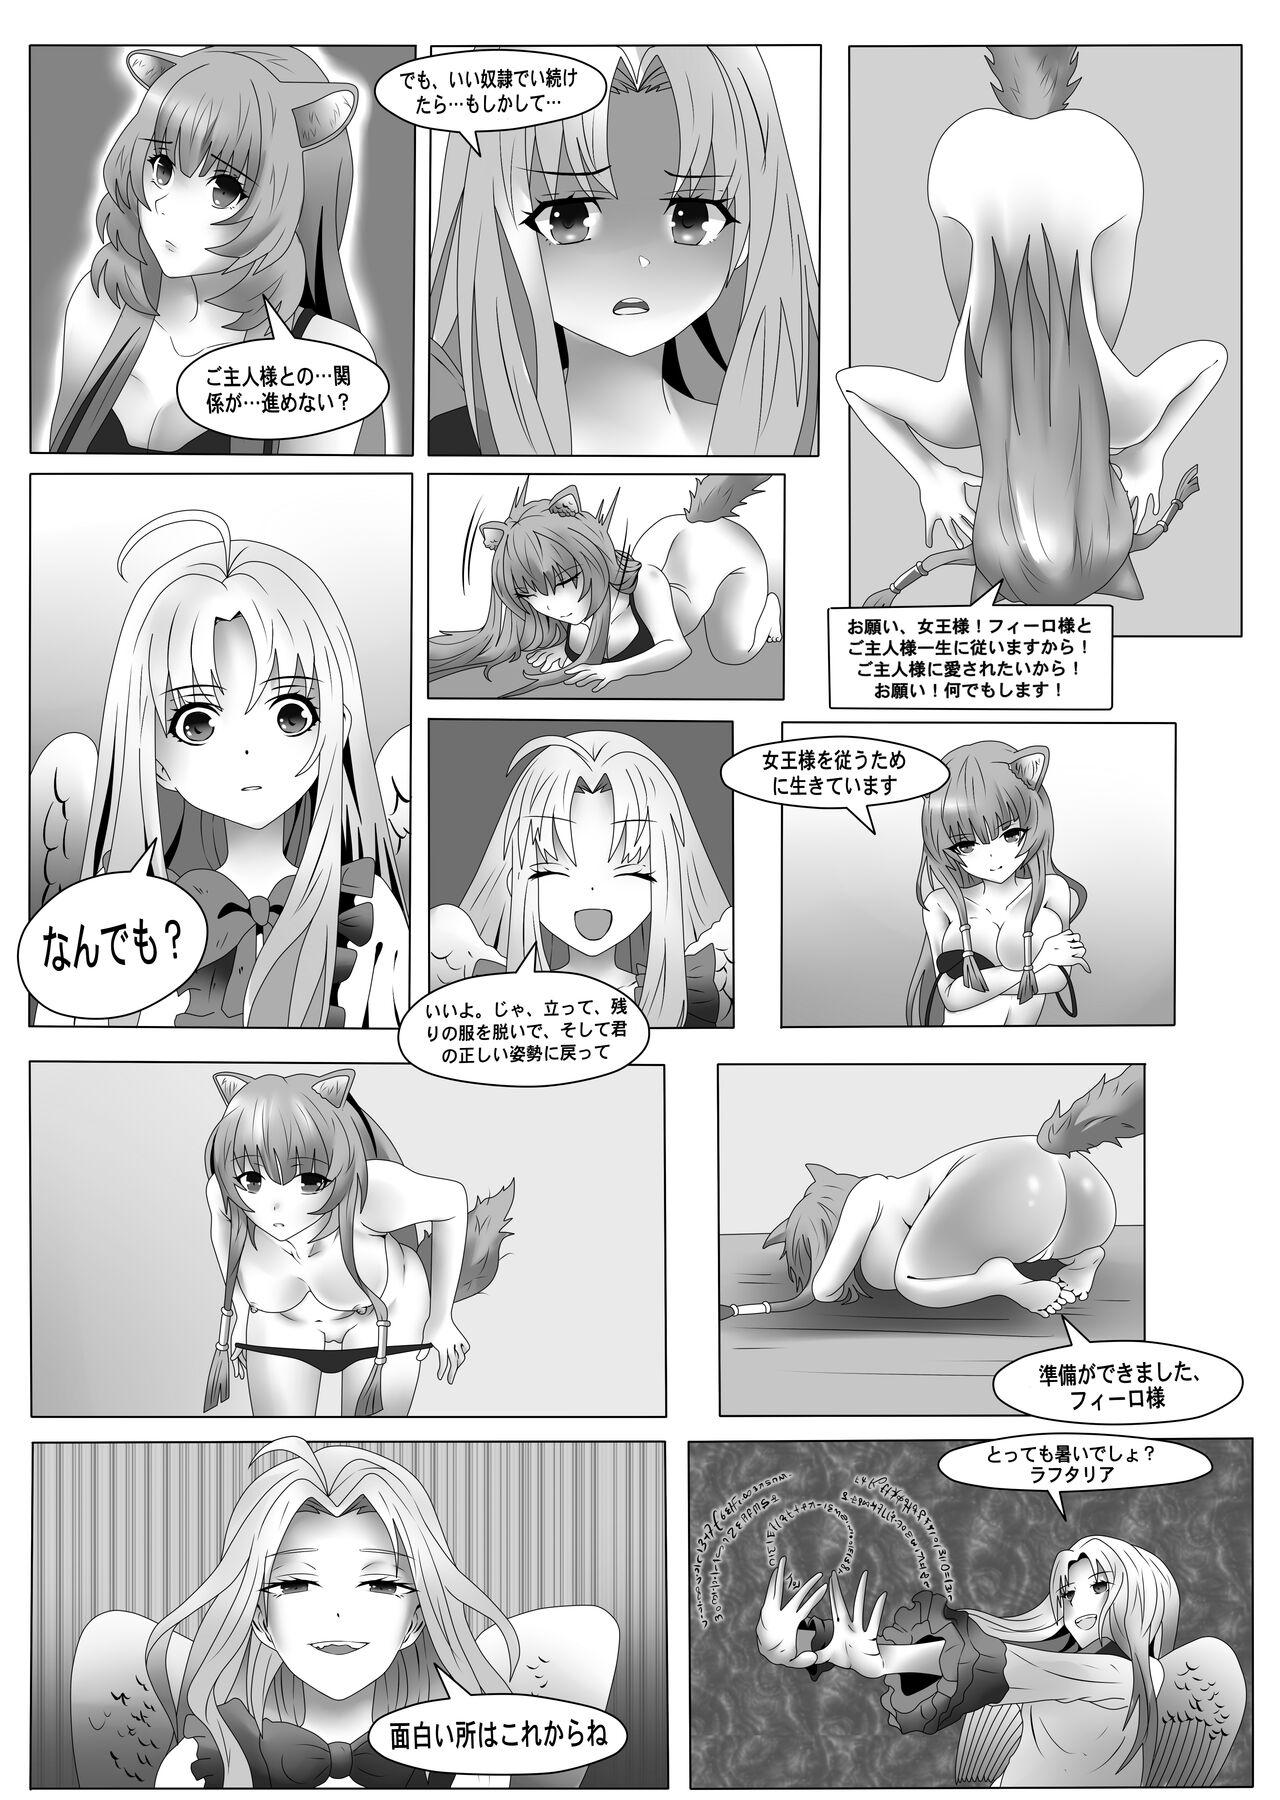 Grande The Rising Of The Shield Hero - Happy Point with My Sister and Teacher - Tate no yuusha no nariagari | the rising of the shield hero Sola - Page 6